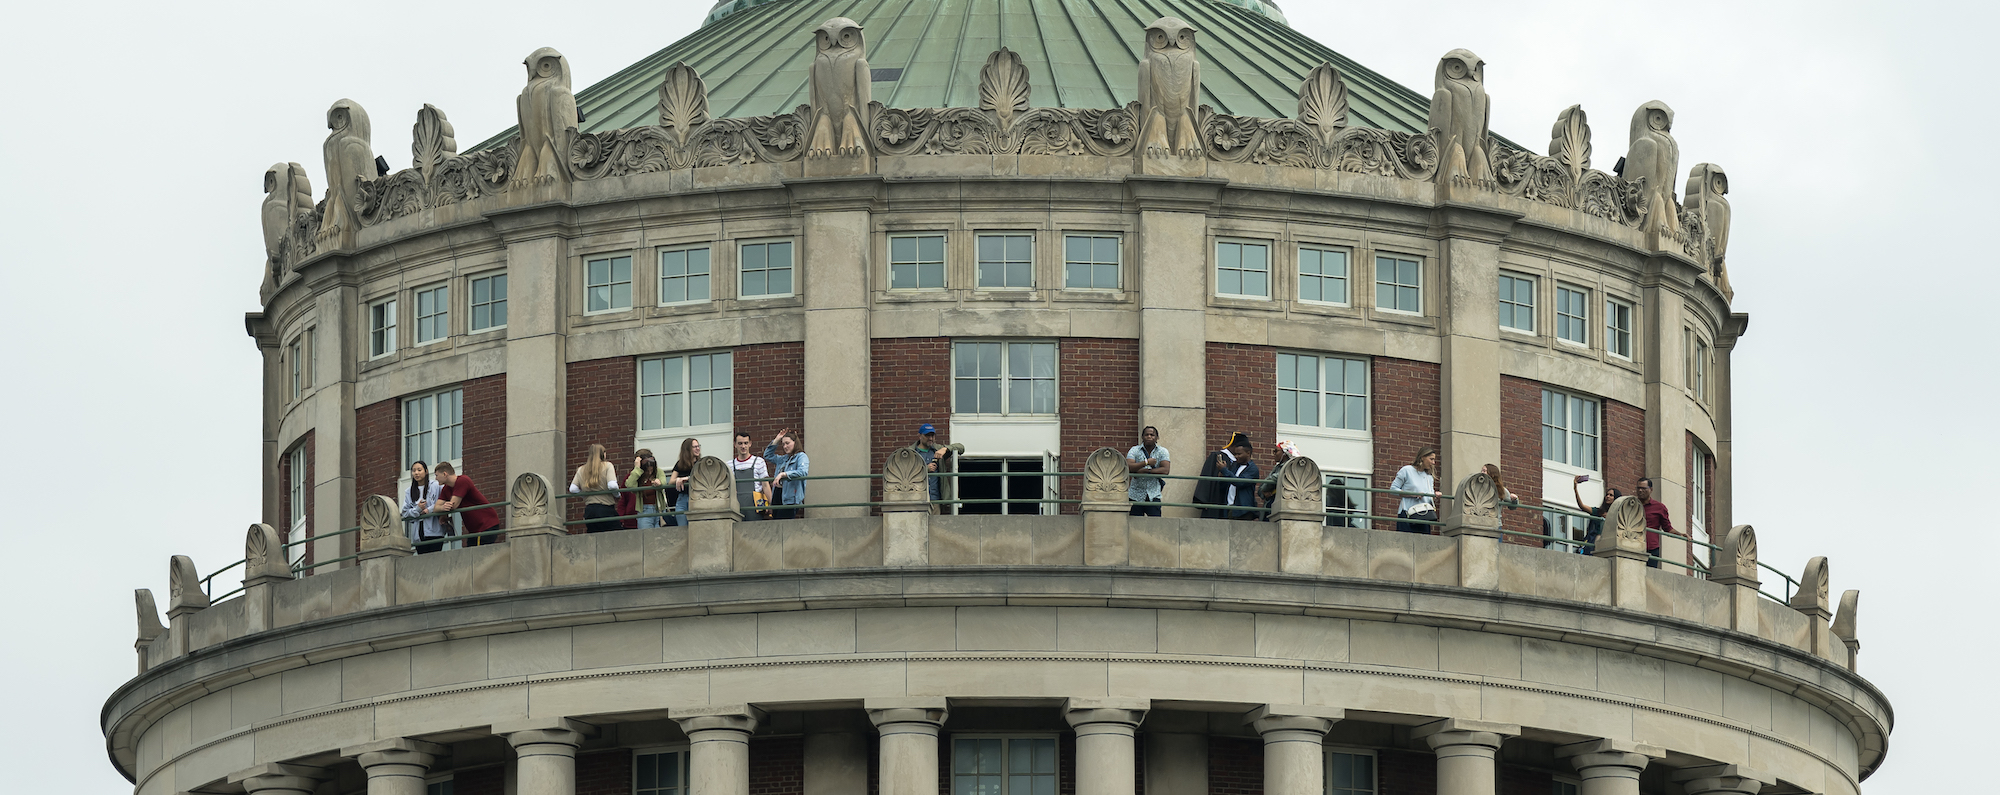 A group of people at the top of Rush Rhees Library Tower, photographed from below